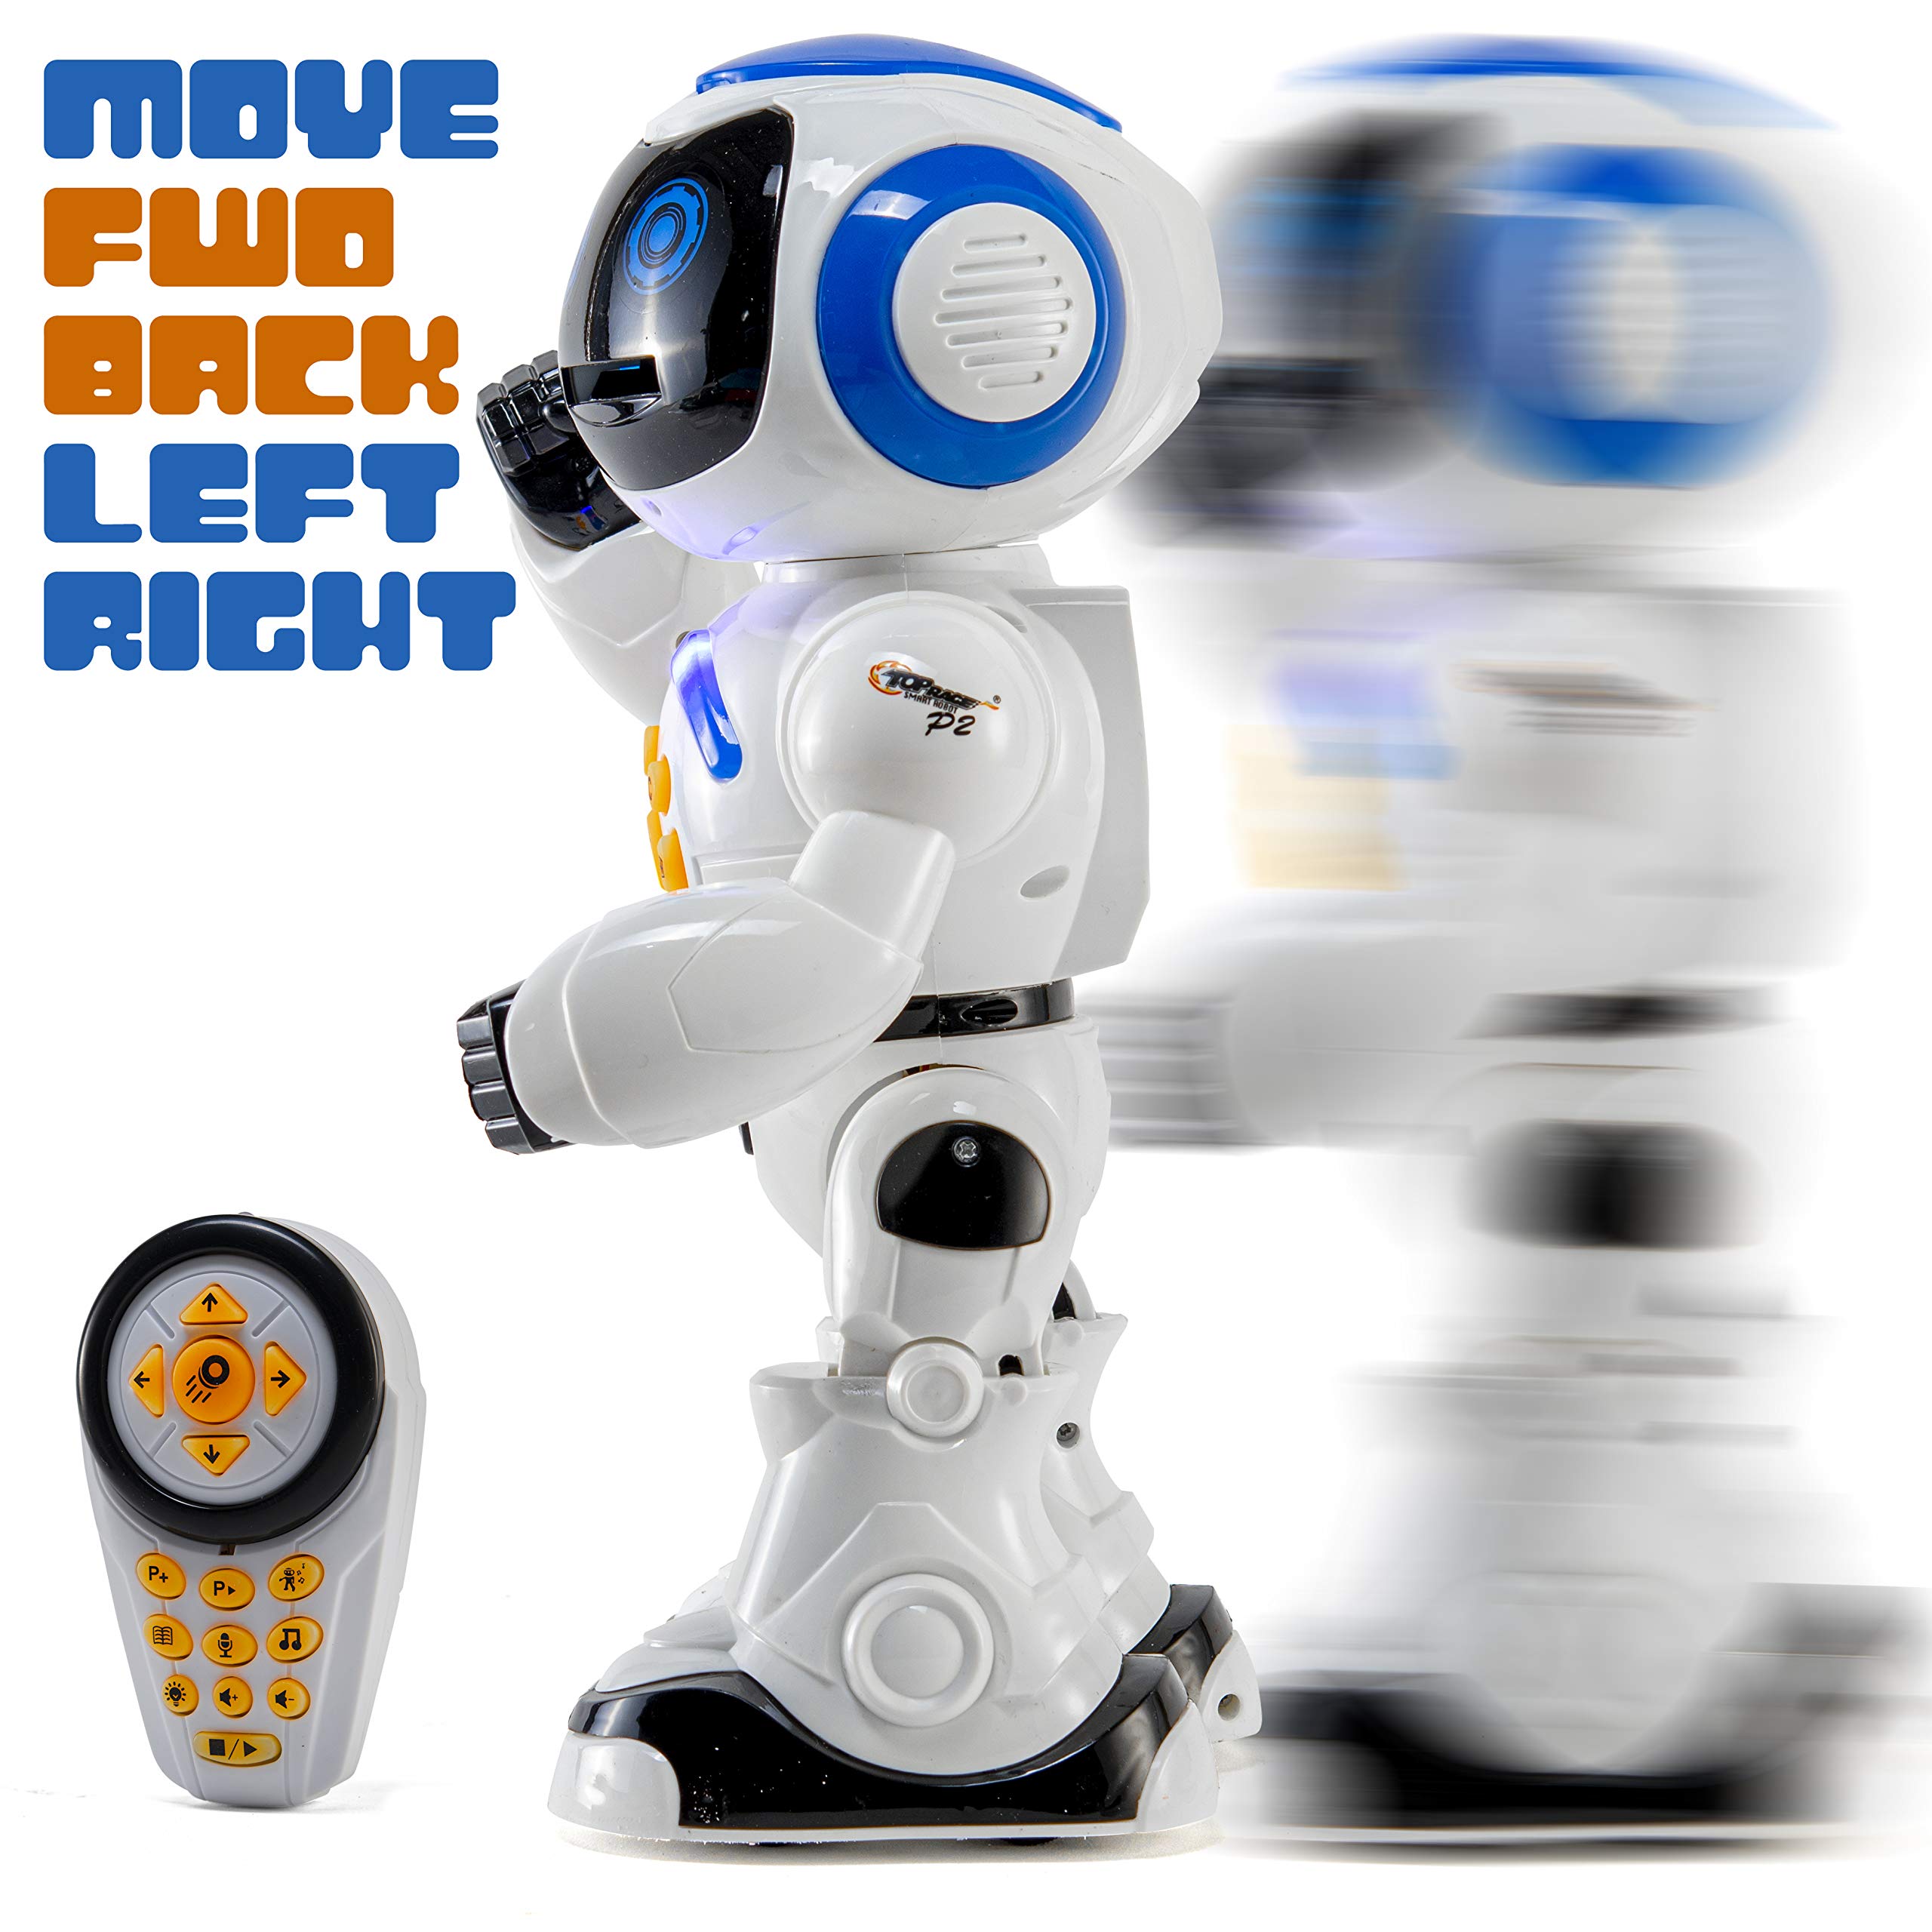 Top Race Remote Control Robot Toys with LED Lights - Interactive Programmable Birthday Gift for Kids - Moving, Dancing, Talking and Play Flying Disc - Rechargeable 12